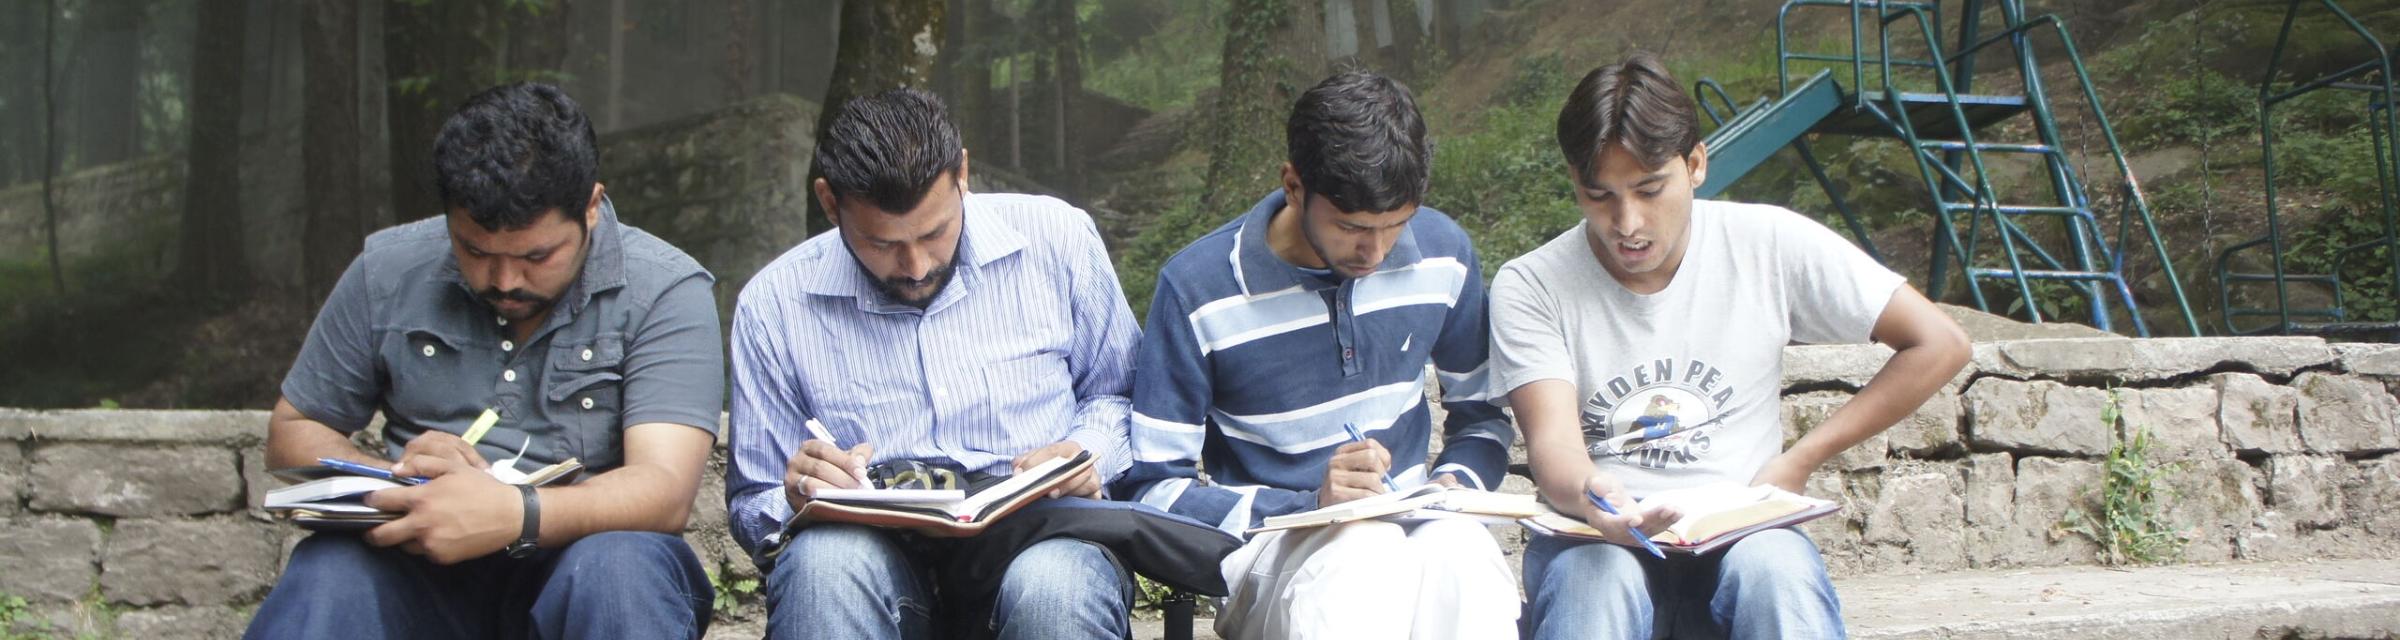 Studying the Bible together in Pakistan.